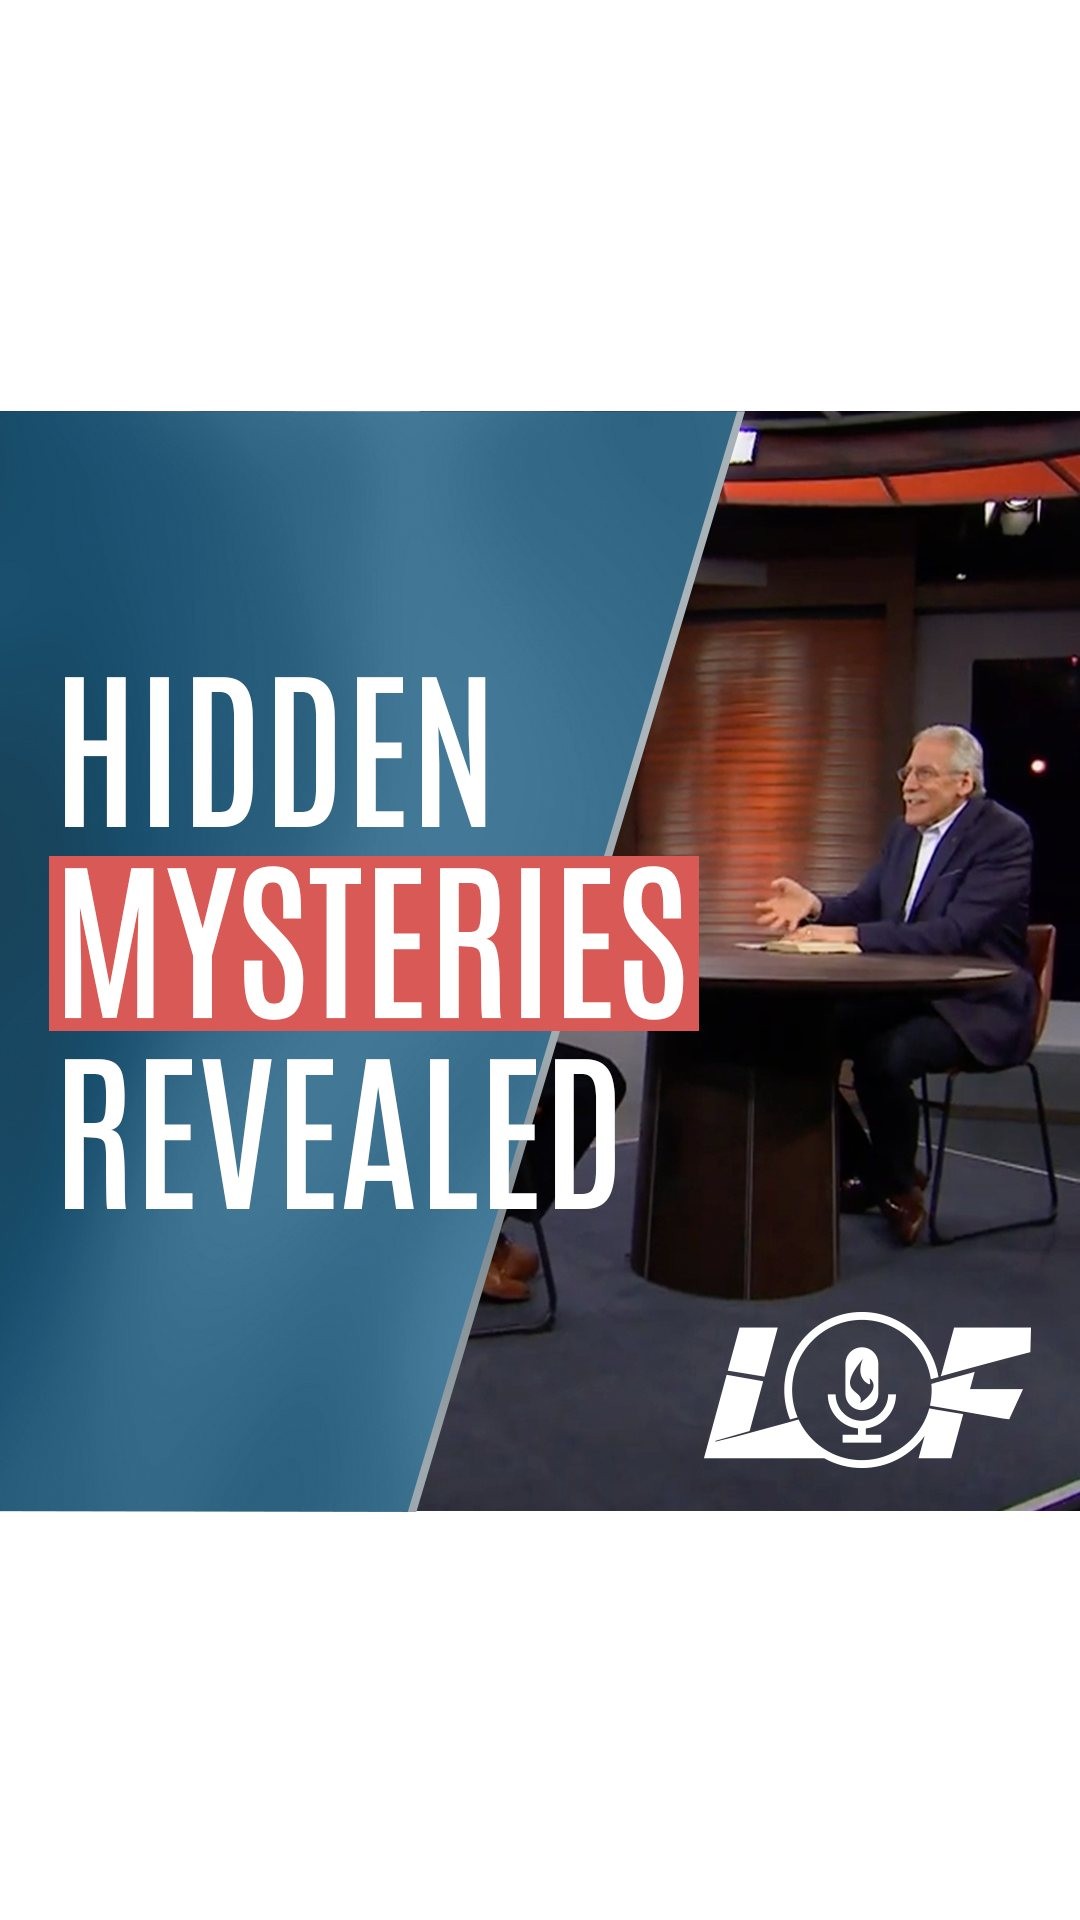 Hidden Mysteries Revealed
“The devil hides his mysteries in the darkness; God hides His mysteries in the light.” So argues Dr. Bob Gladstone in the final episode of the Ways of the Kingdom series, where he and Dr. Brown discuss the “Mysteries” in Paul’s writings. LINK TO FULL VIDEO IN BIO